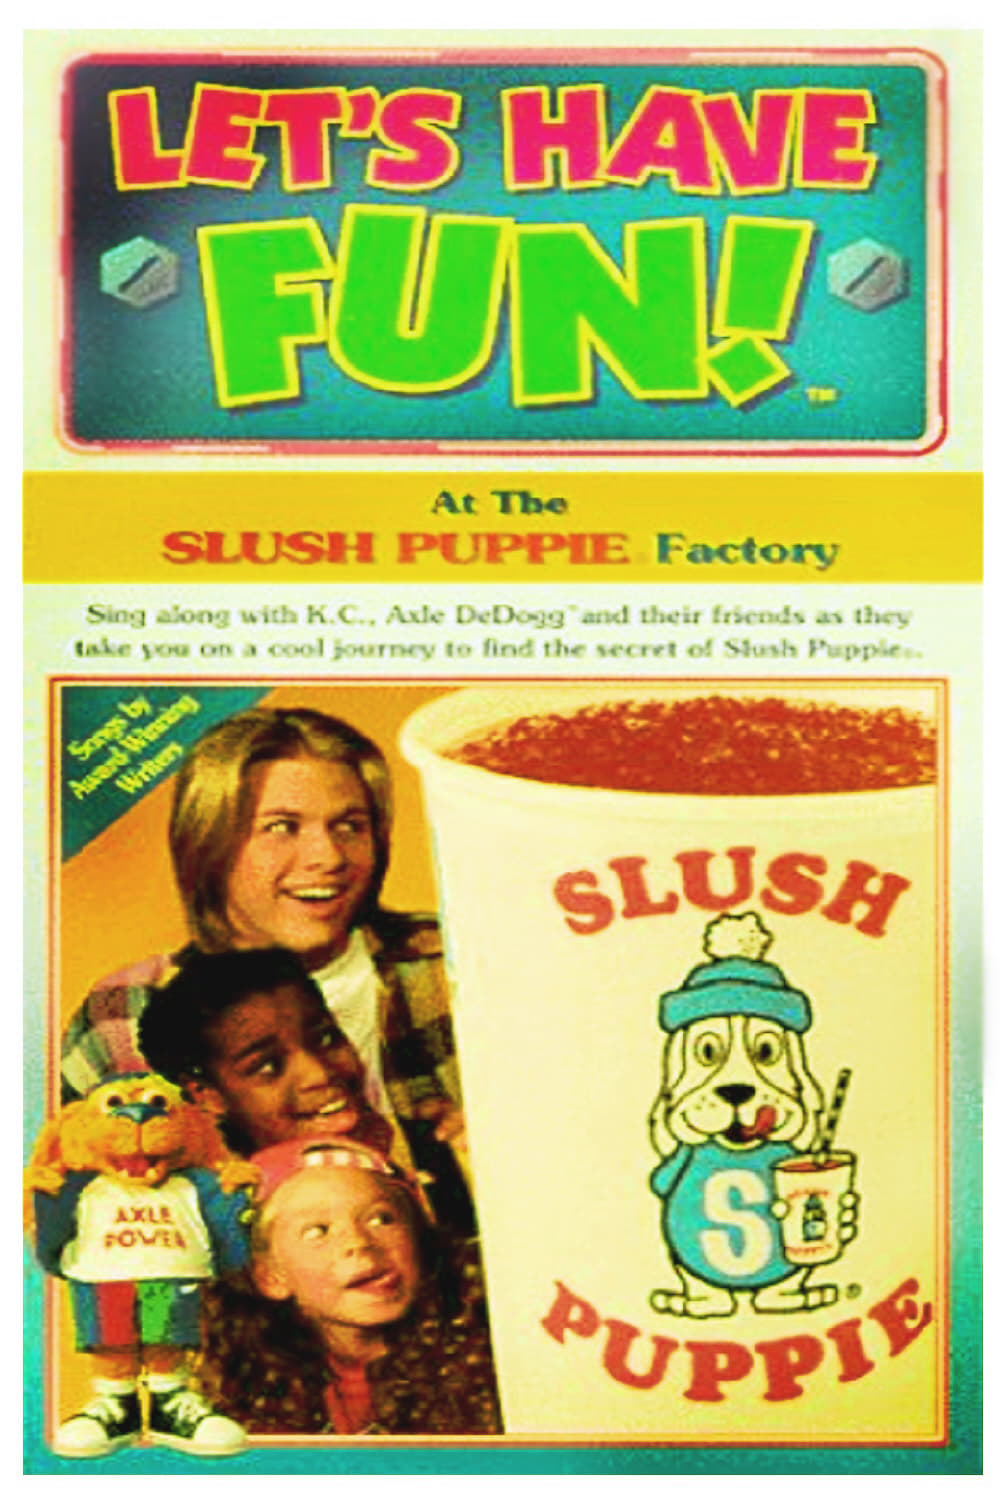 Let's Have Fun! At The Slush Puppie Factory